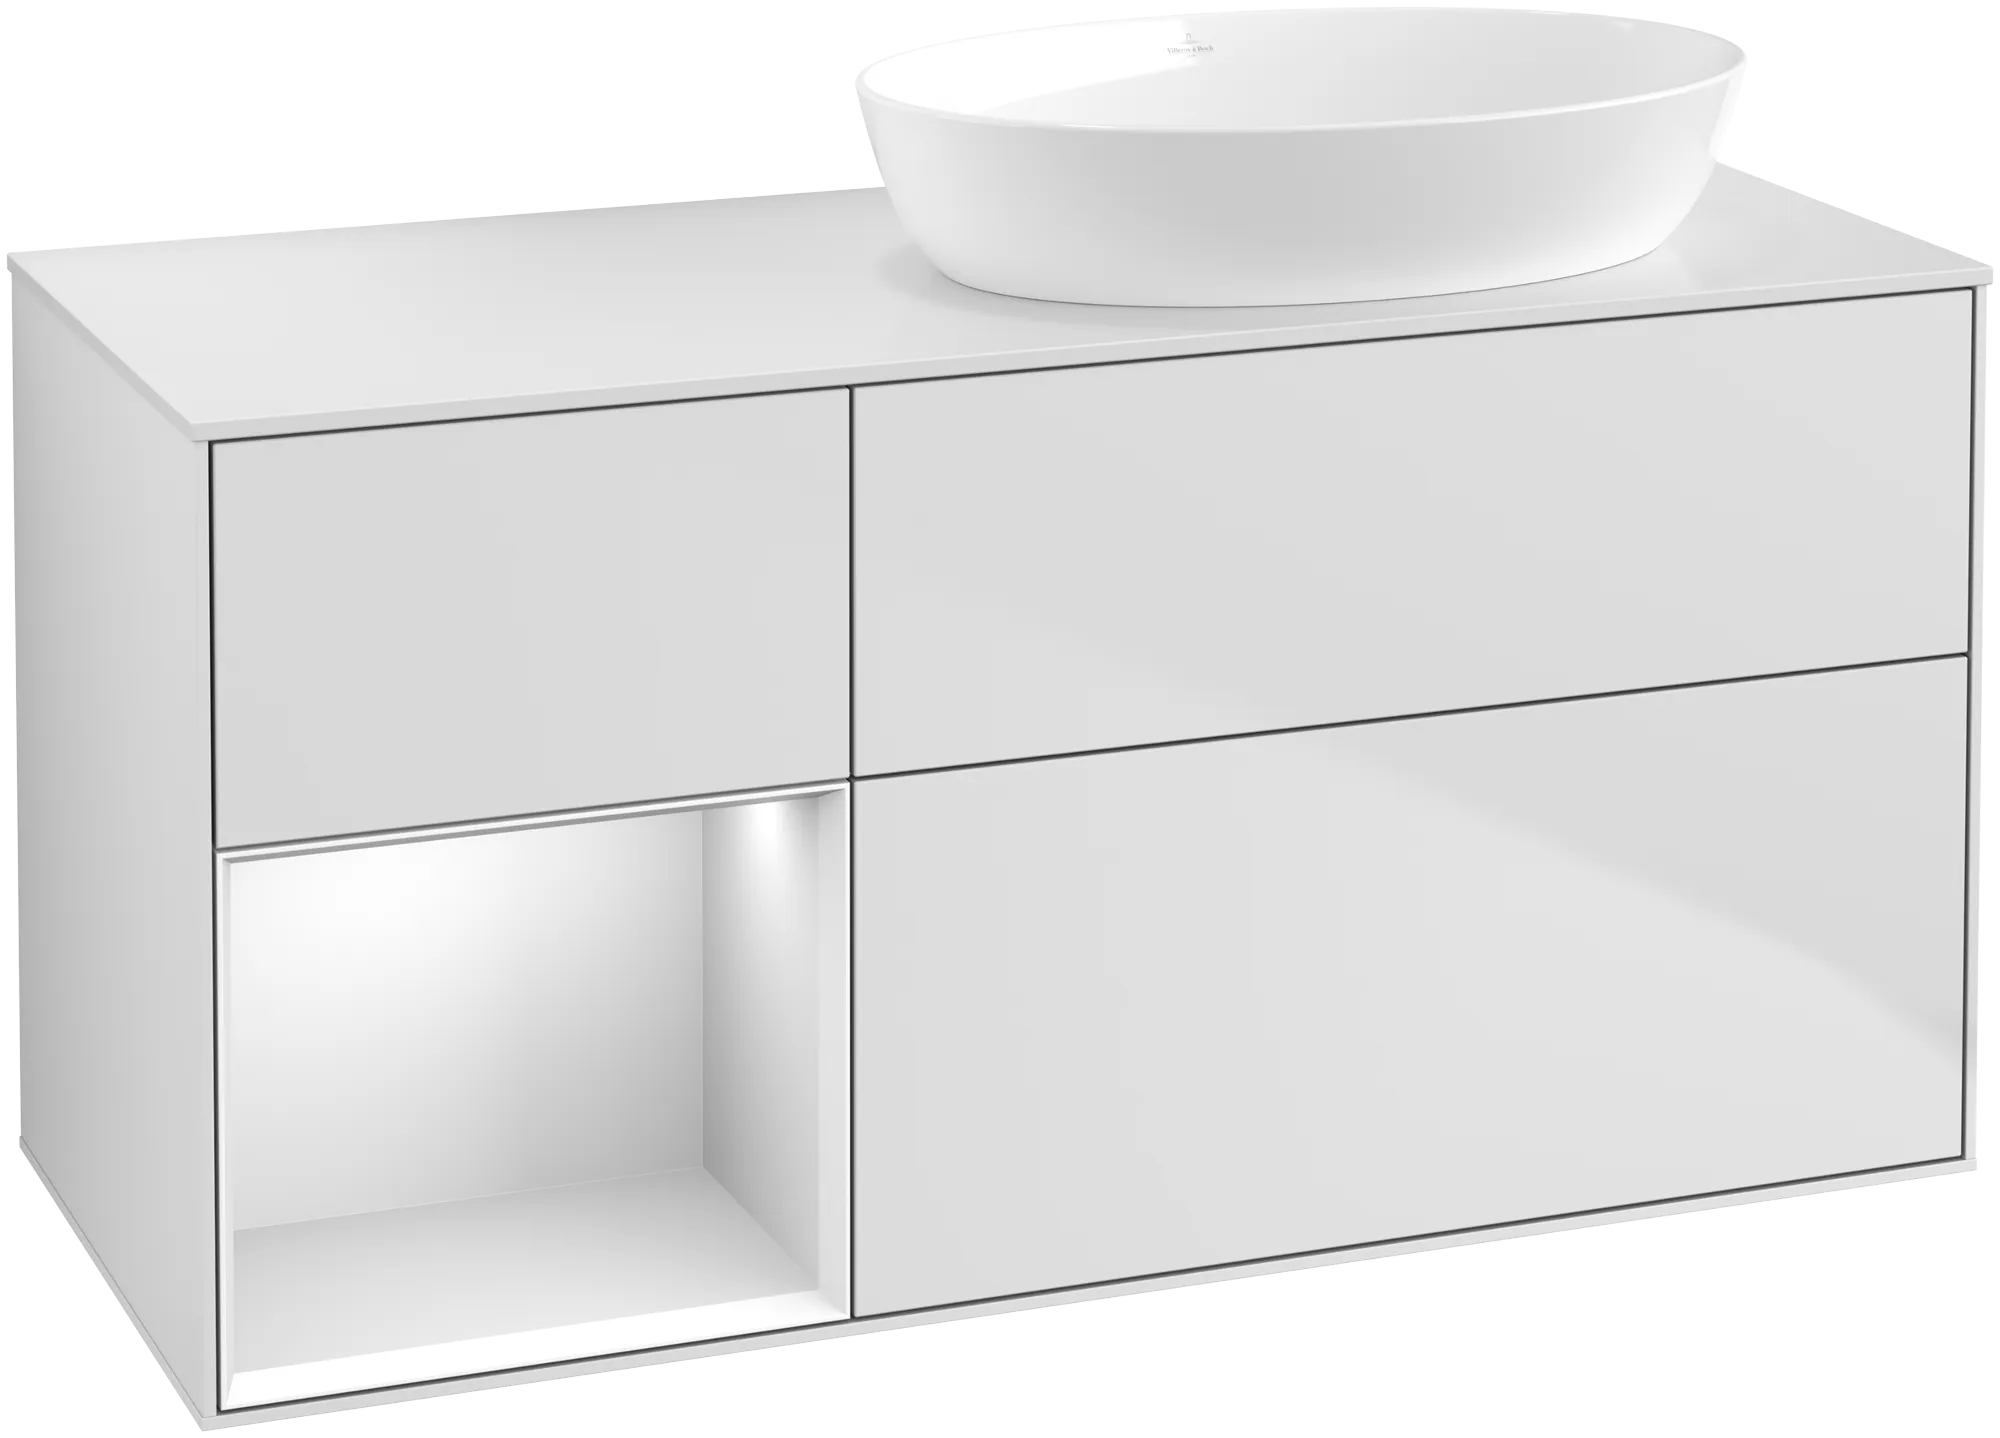 Picture of VILLEROY BOCH Finion Vanity unit, with lighting, 3 pull-out compartments, 1200 x 603 x 501 mm, White Matt Lacquer / White Matt Lacquer / Glass White Matt #GA41MTMT